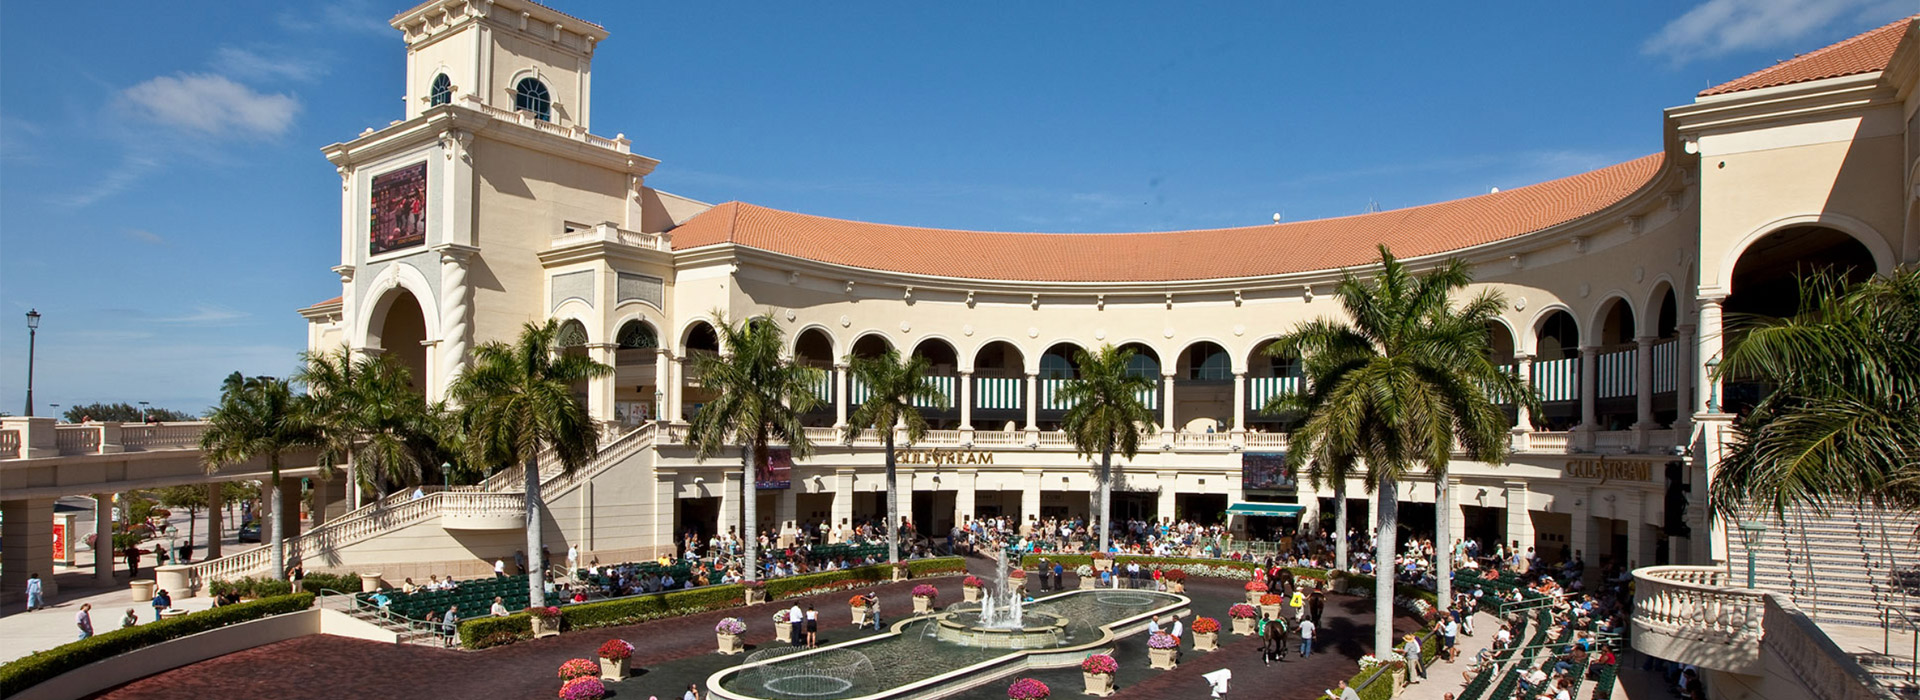 Village at Gulfstream Park Shopping and Dining